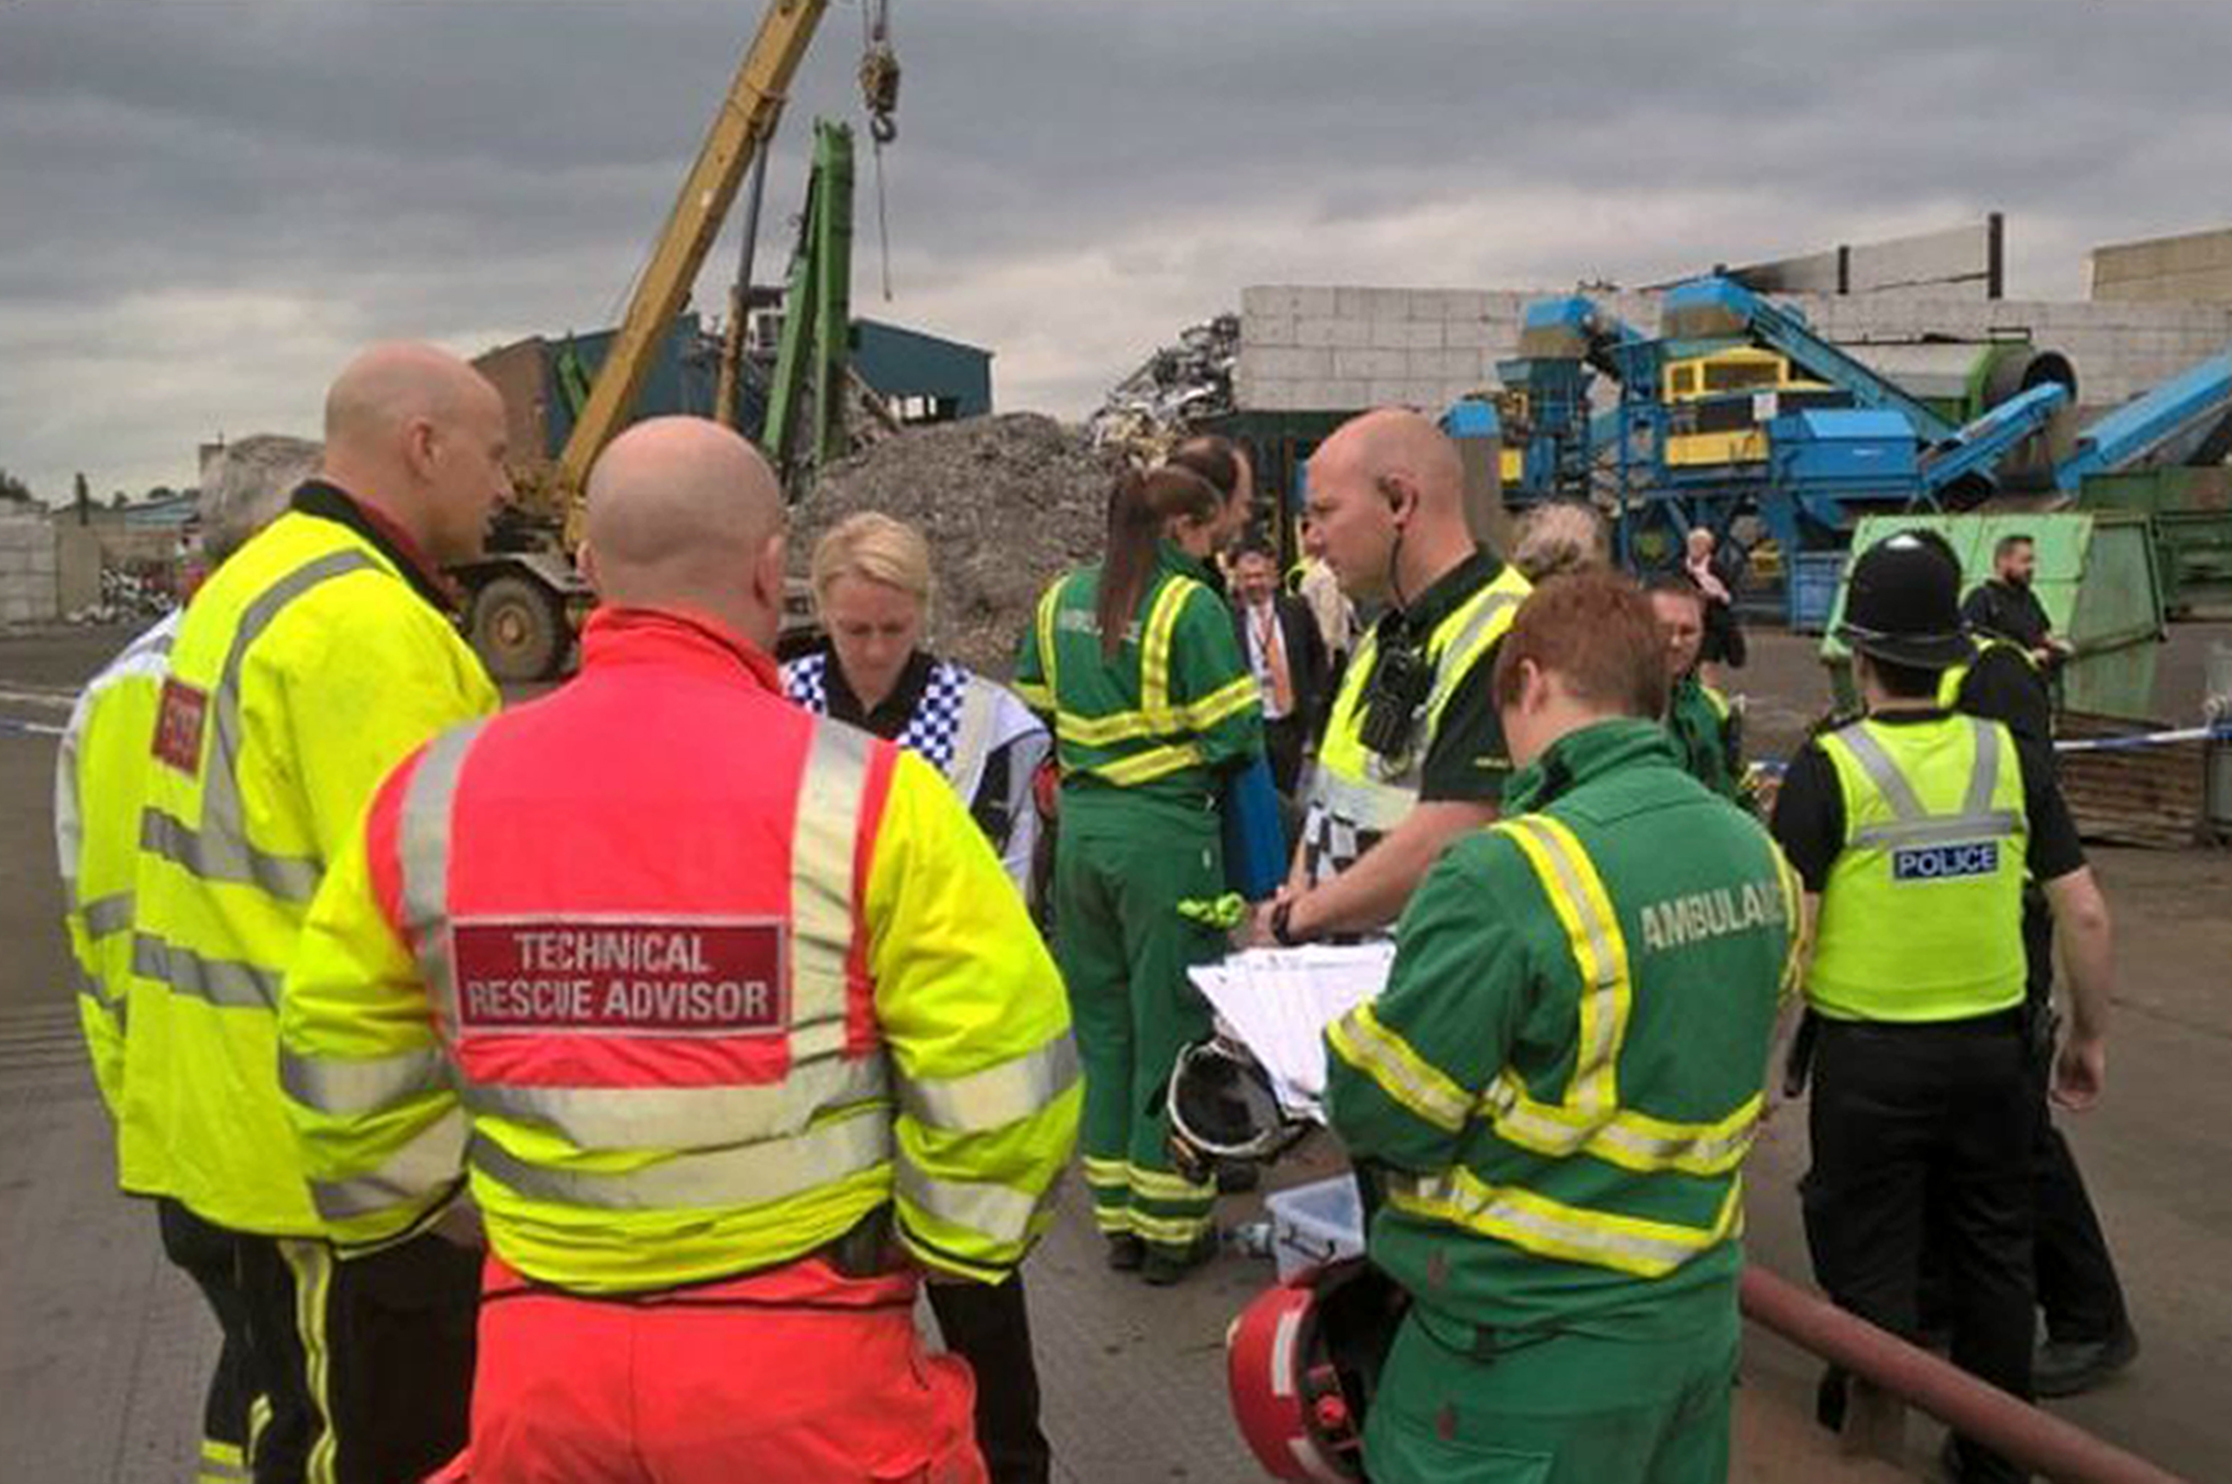 Five men died when a wall collapsed at a recycling plant in the Nechells area of Birmingham.